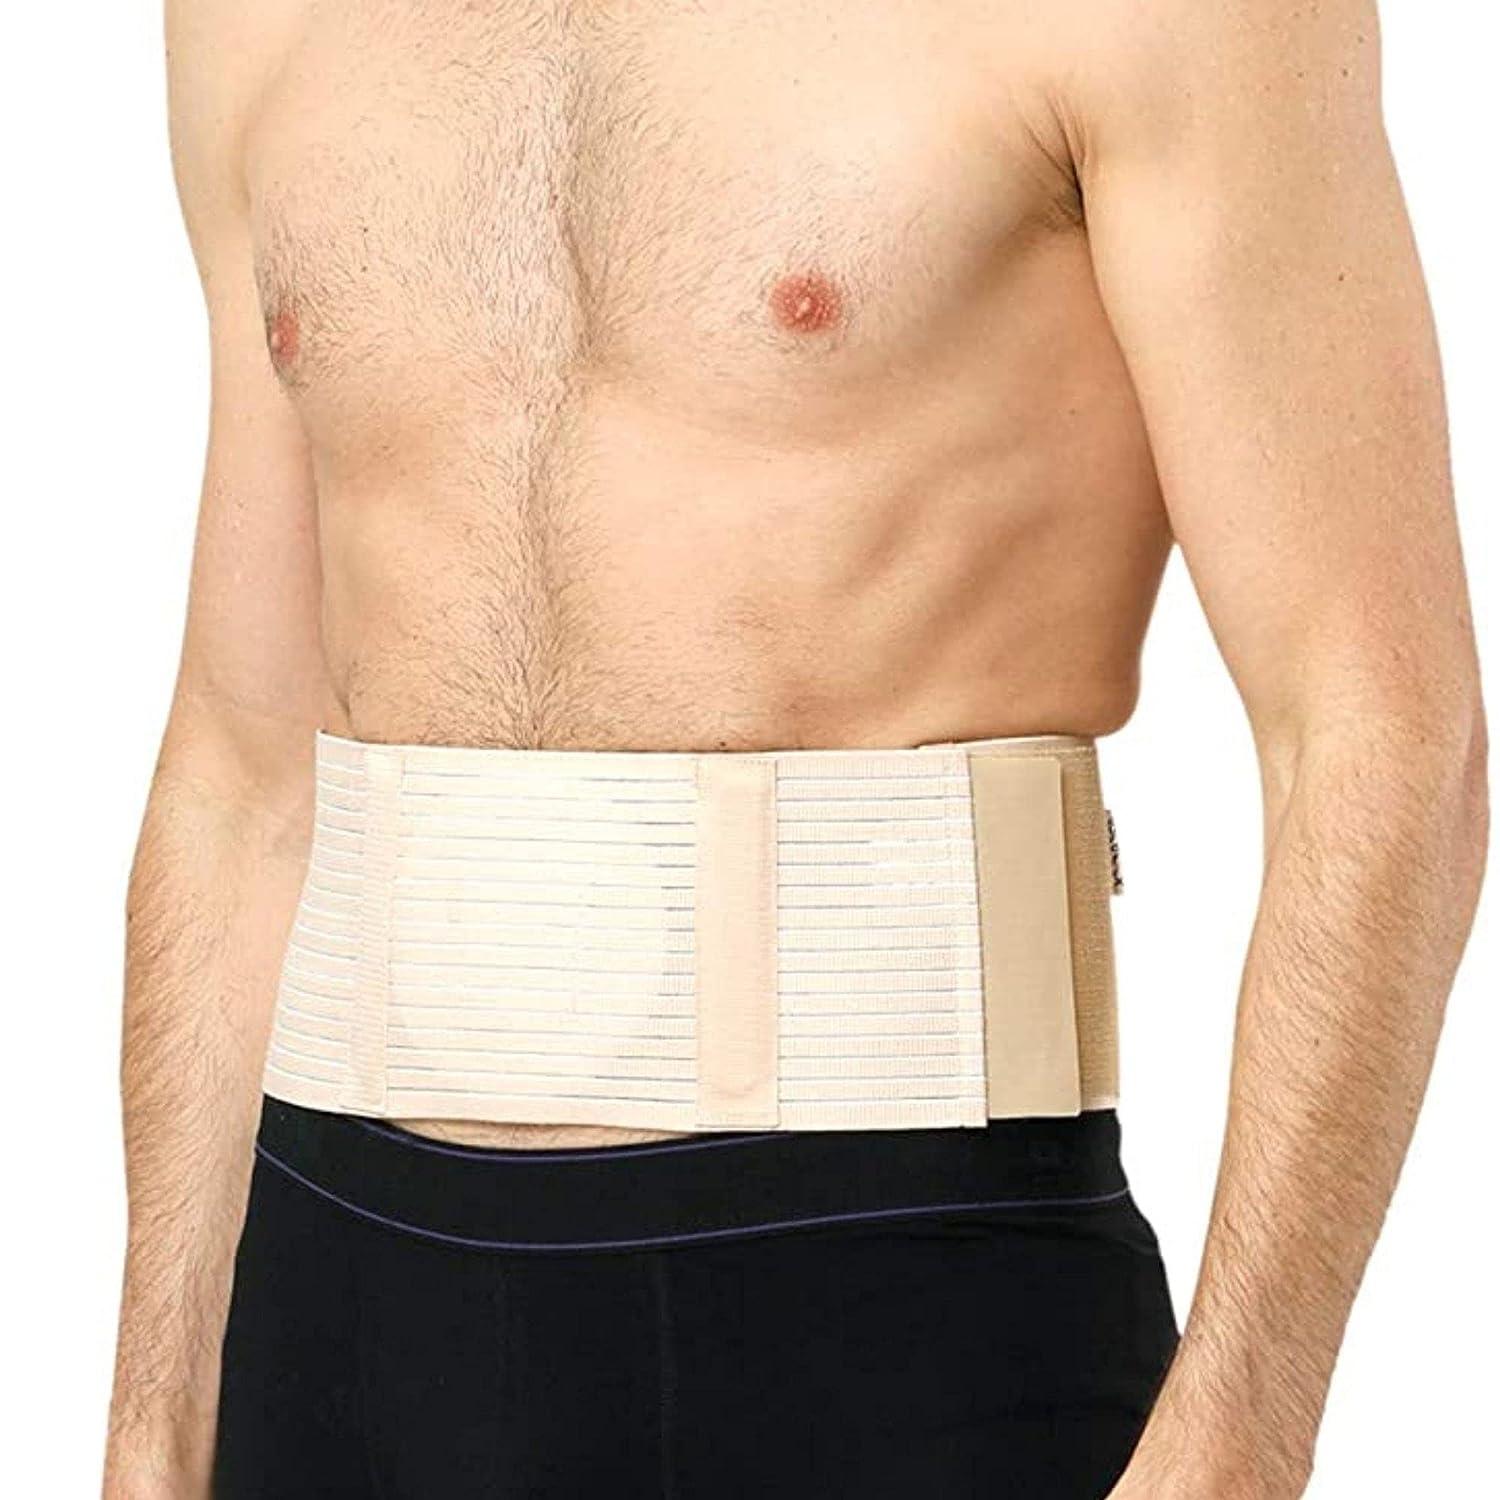 How to Wear a Support Belt for an Umbilical Hernia? – Everyday Medical